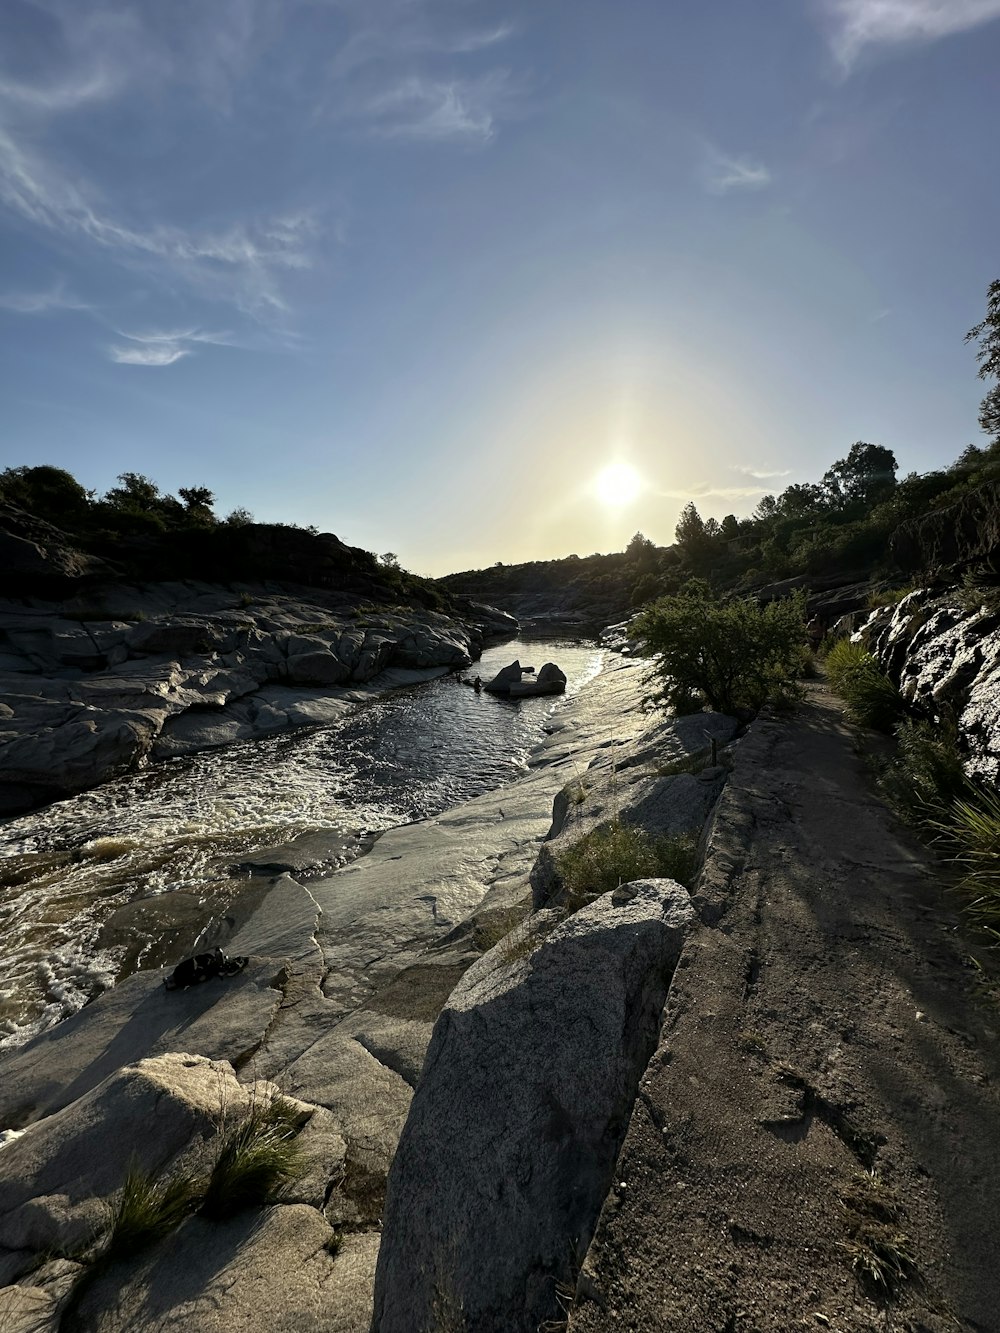 the sun is setting over a rocky river